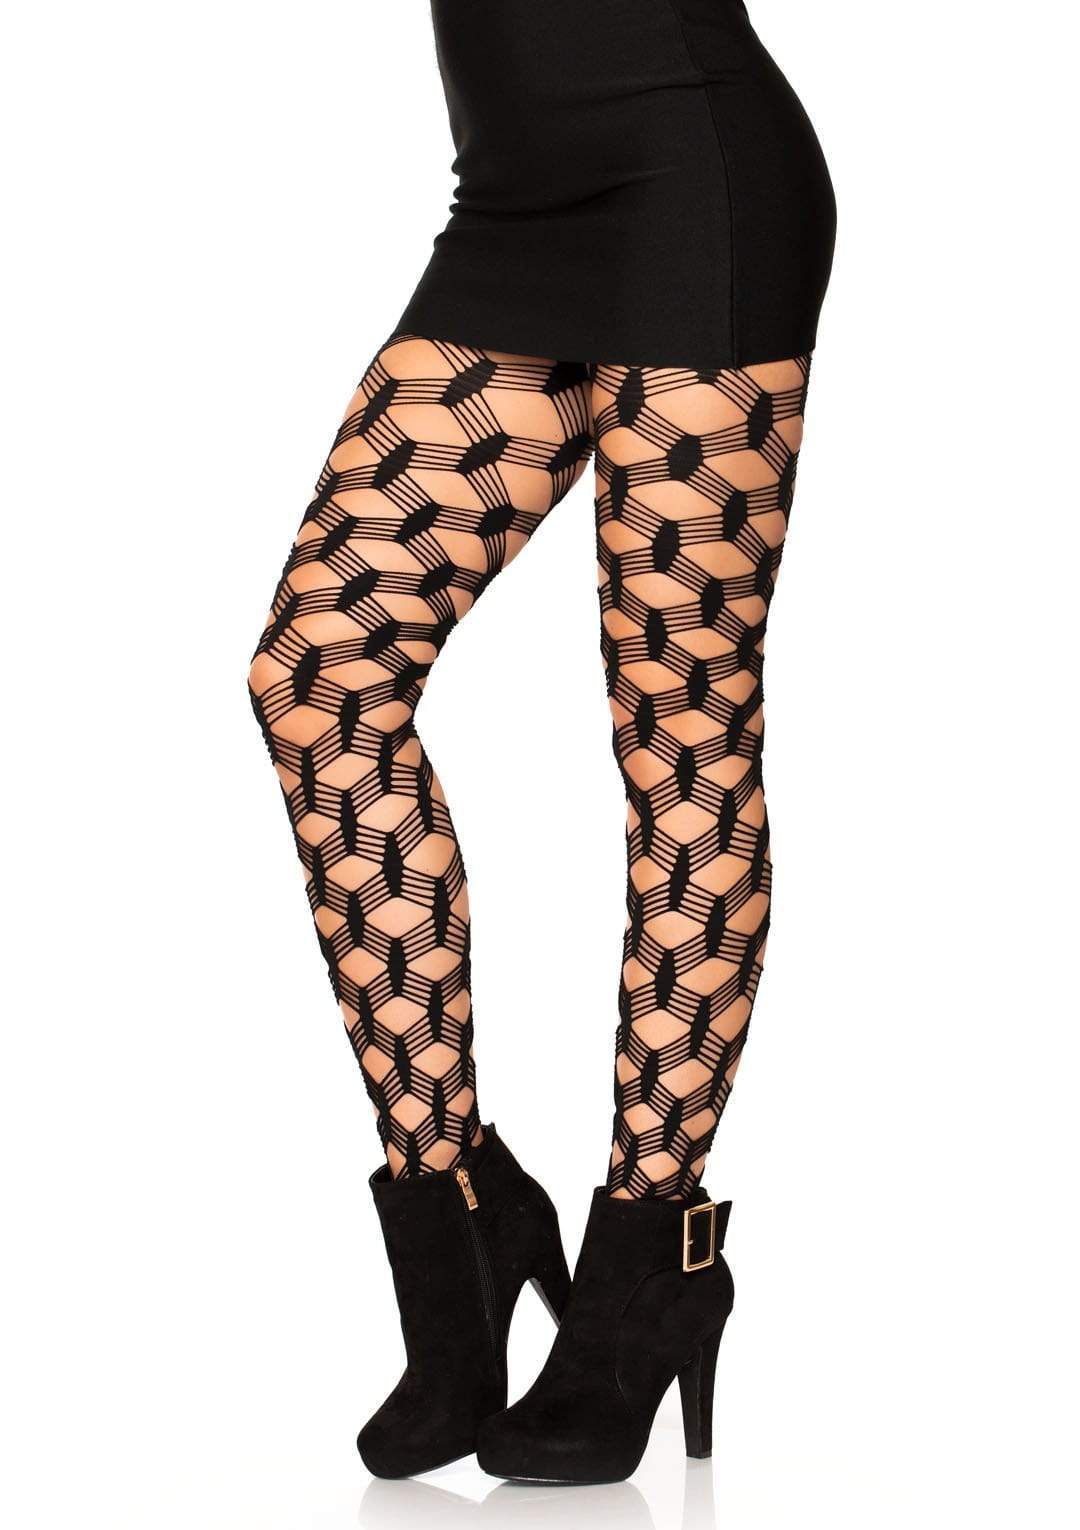  Leg Avenue Women's Professional Fishnet Tights, Black, A/B:  Adult Exotic Costumes: Clothing, Shoes & Jewelry